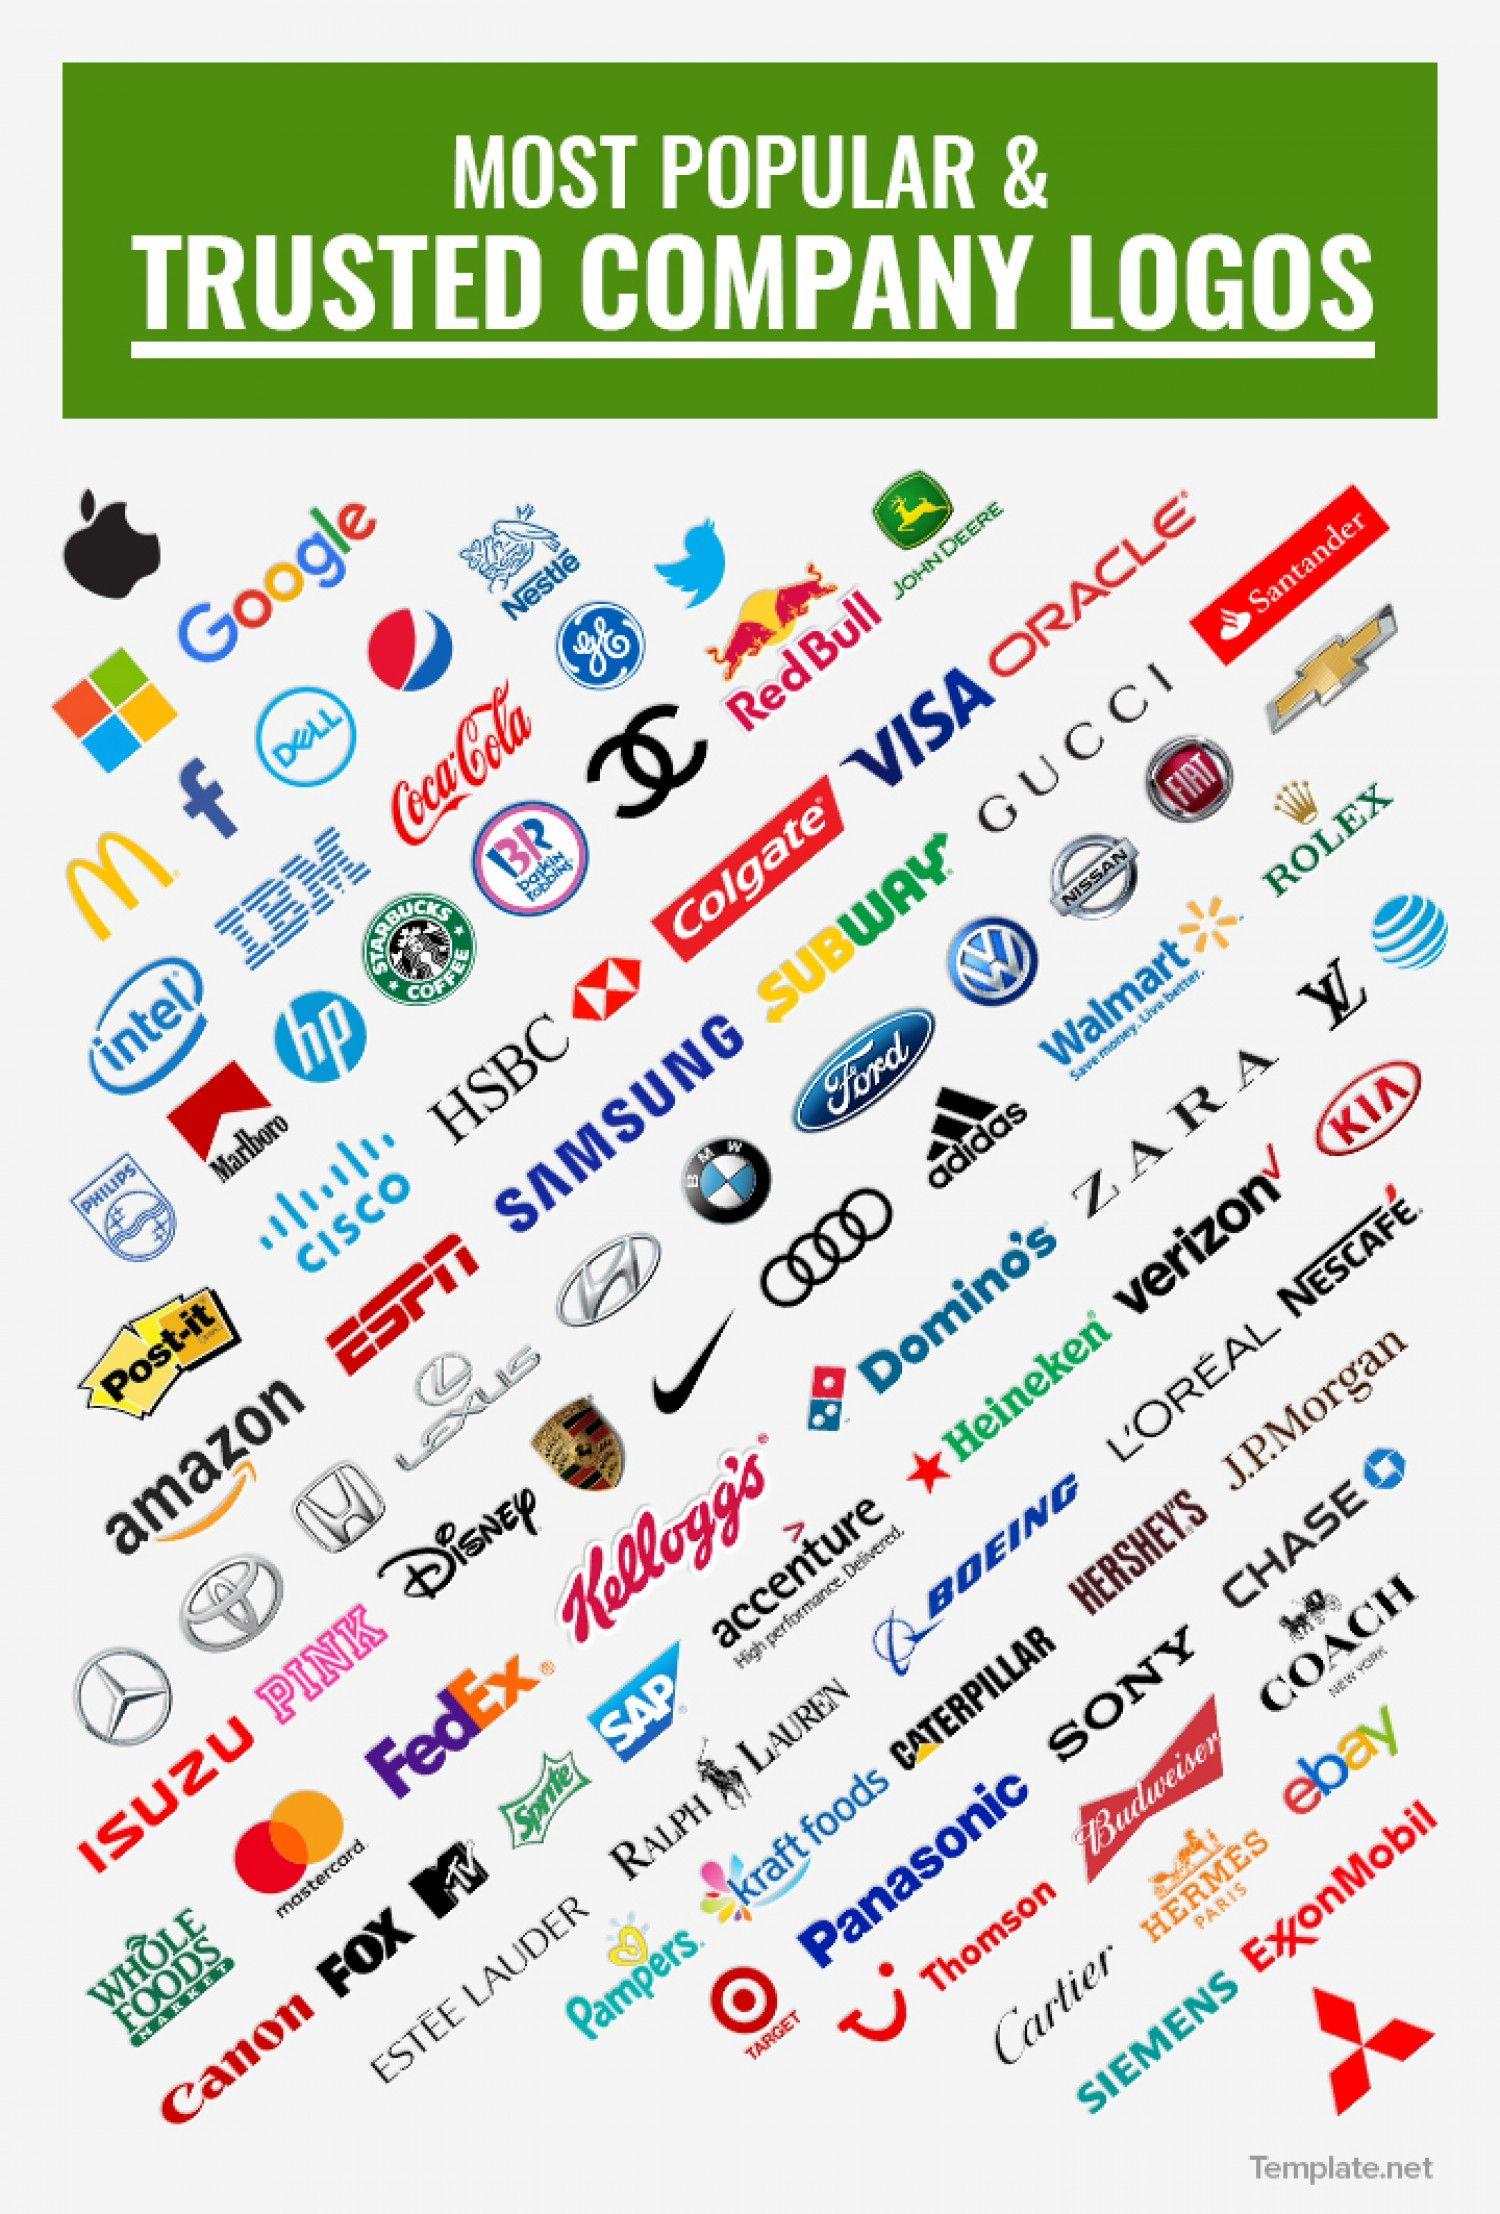 Most Famous Company Logo - All about Famous Logos Design Amp History Of World Famous Company